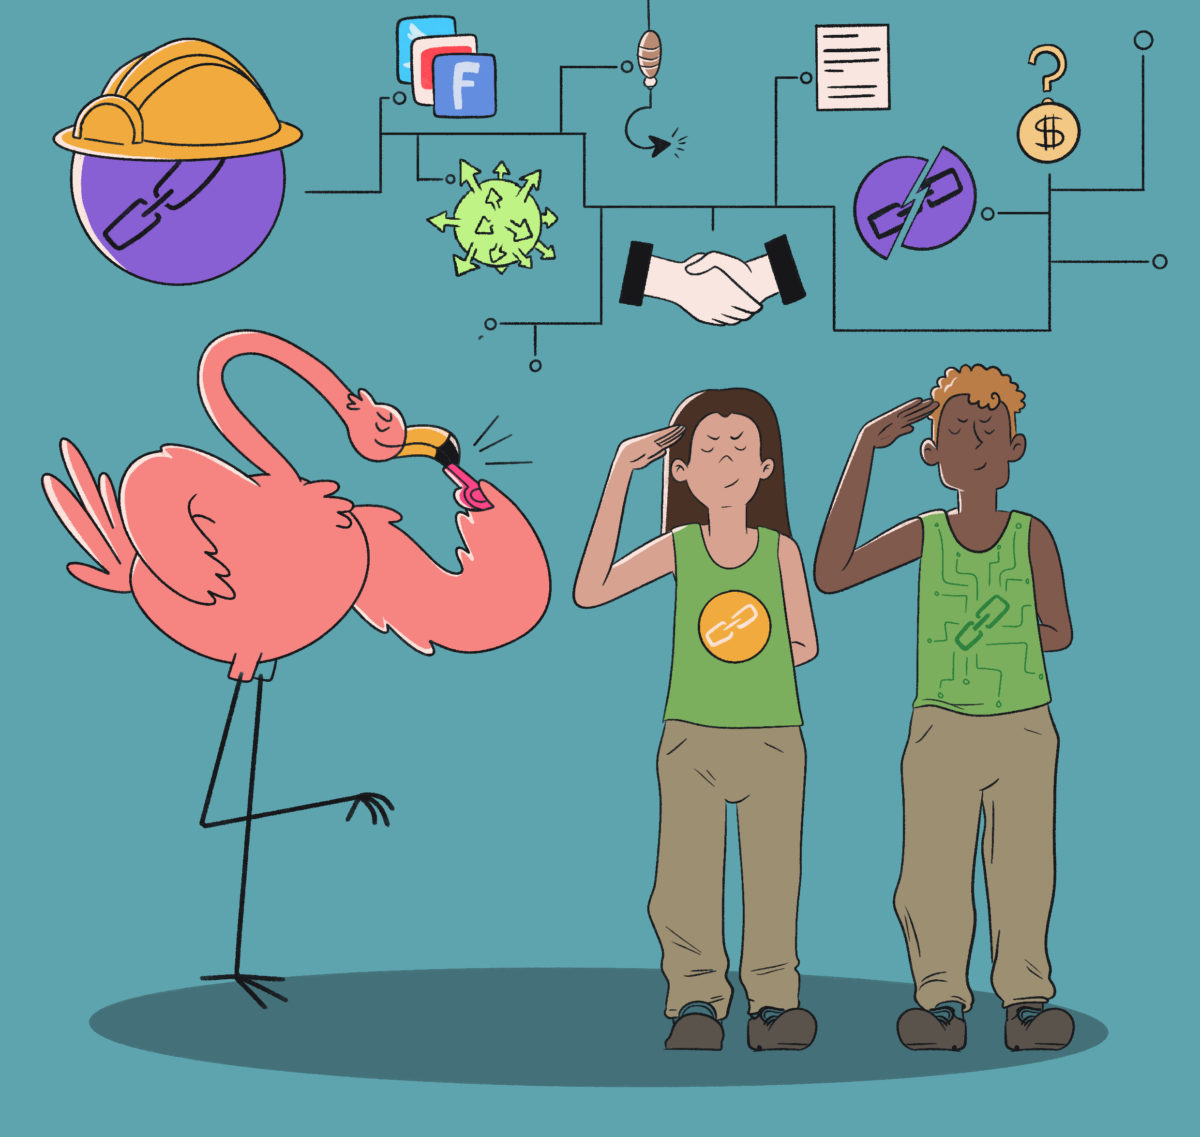 Two people appear perplexed by a pink flamingo balancing a stack of random objects on its beak, with symbolic icons depicting various business and social media concepts floating in the background.